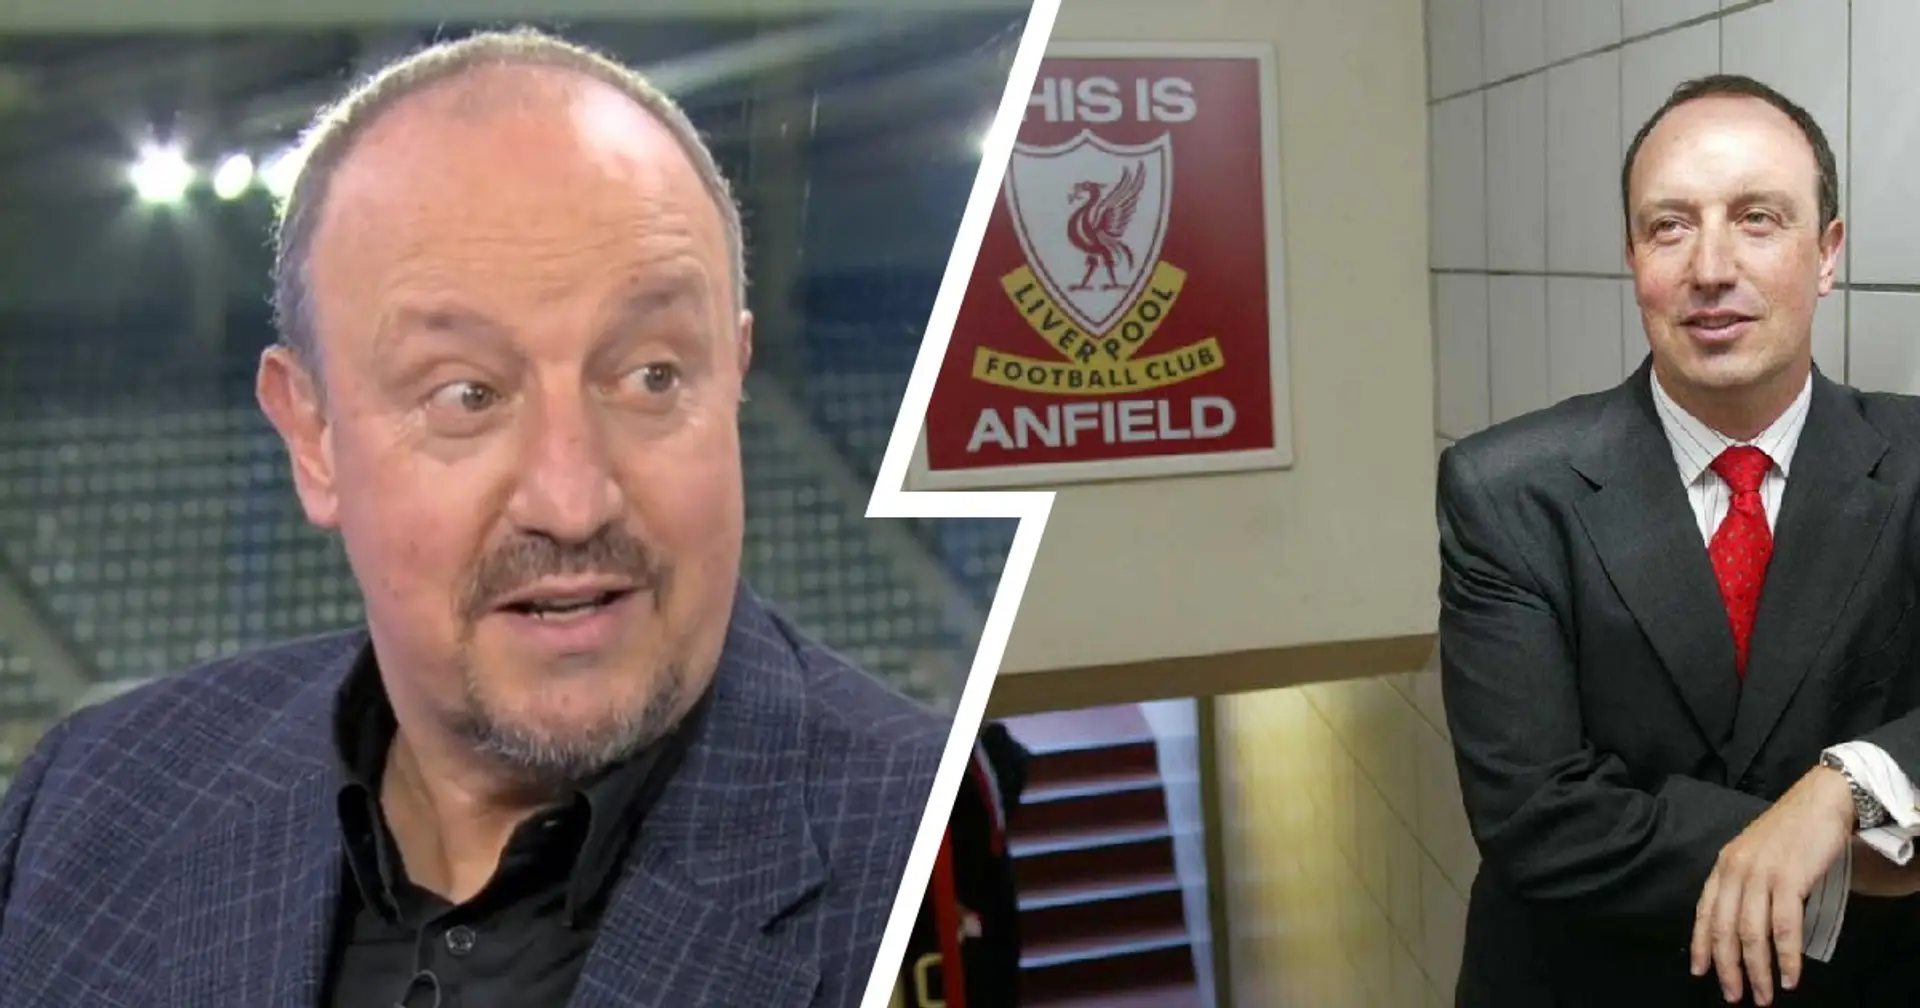 Benitez names his two biggest signings as Liverpool coach - both are Spaniards 